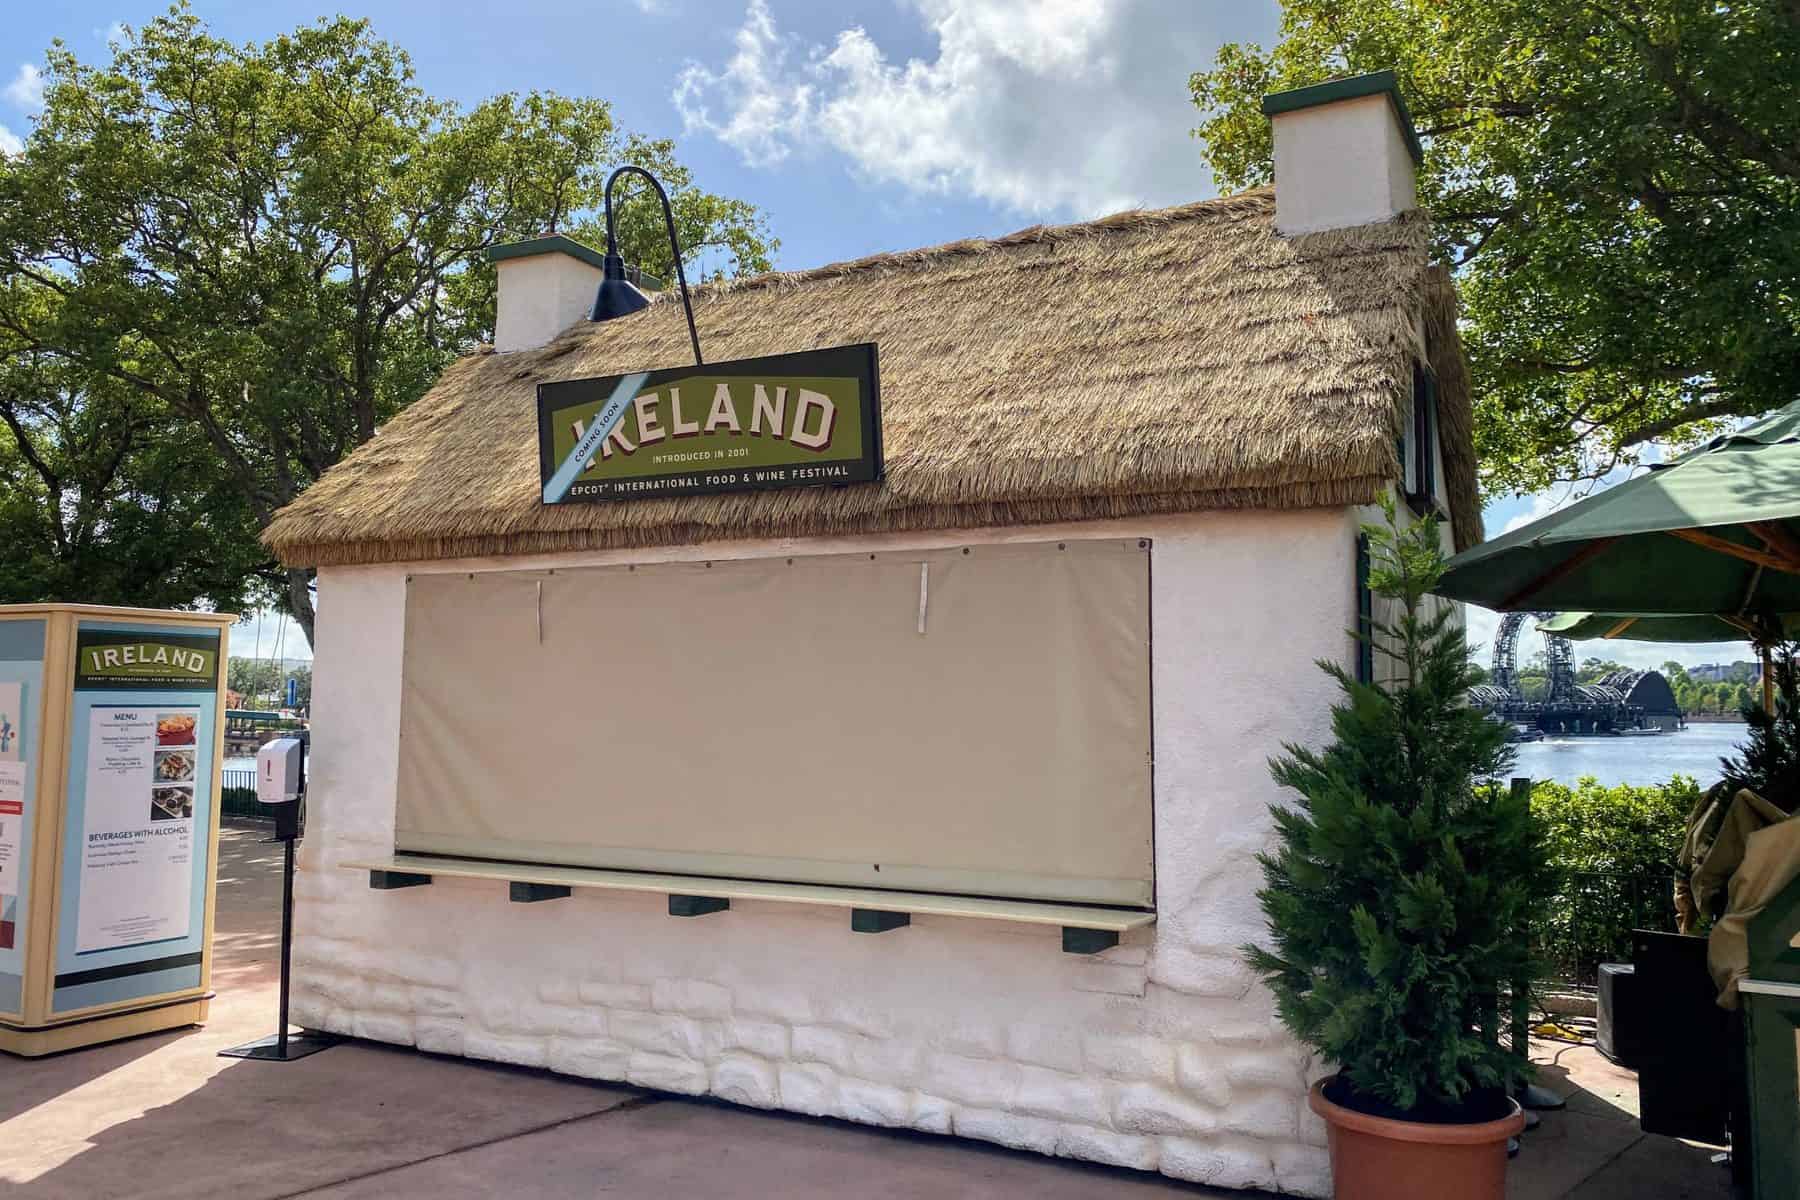 Ireland Booth Menu & Review (2021 Epcot Food & Wine Festival)